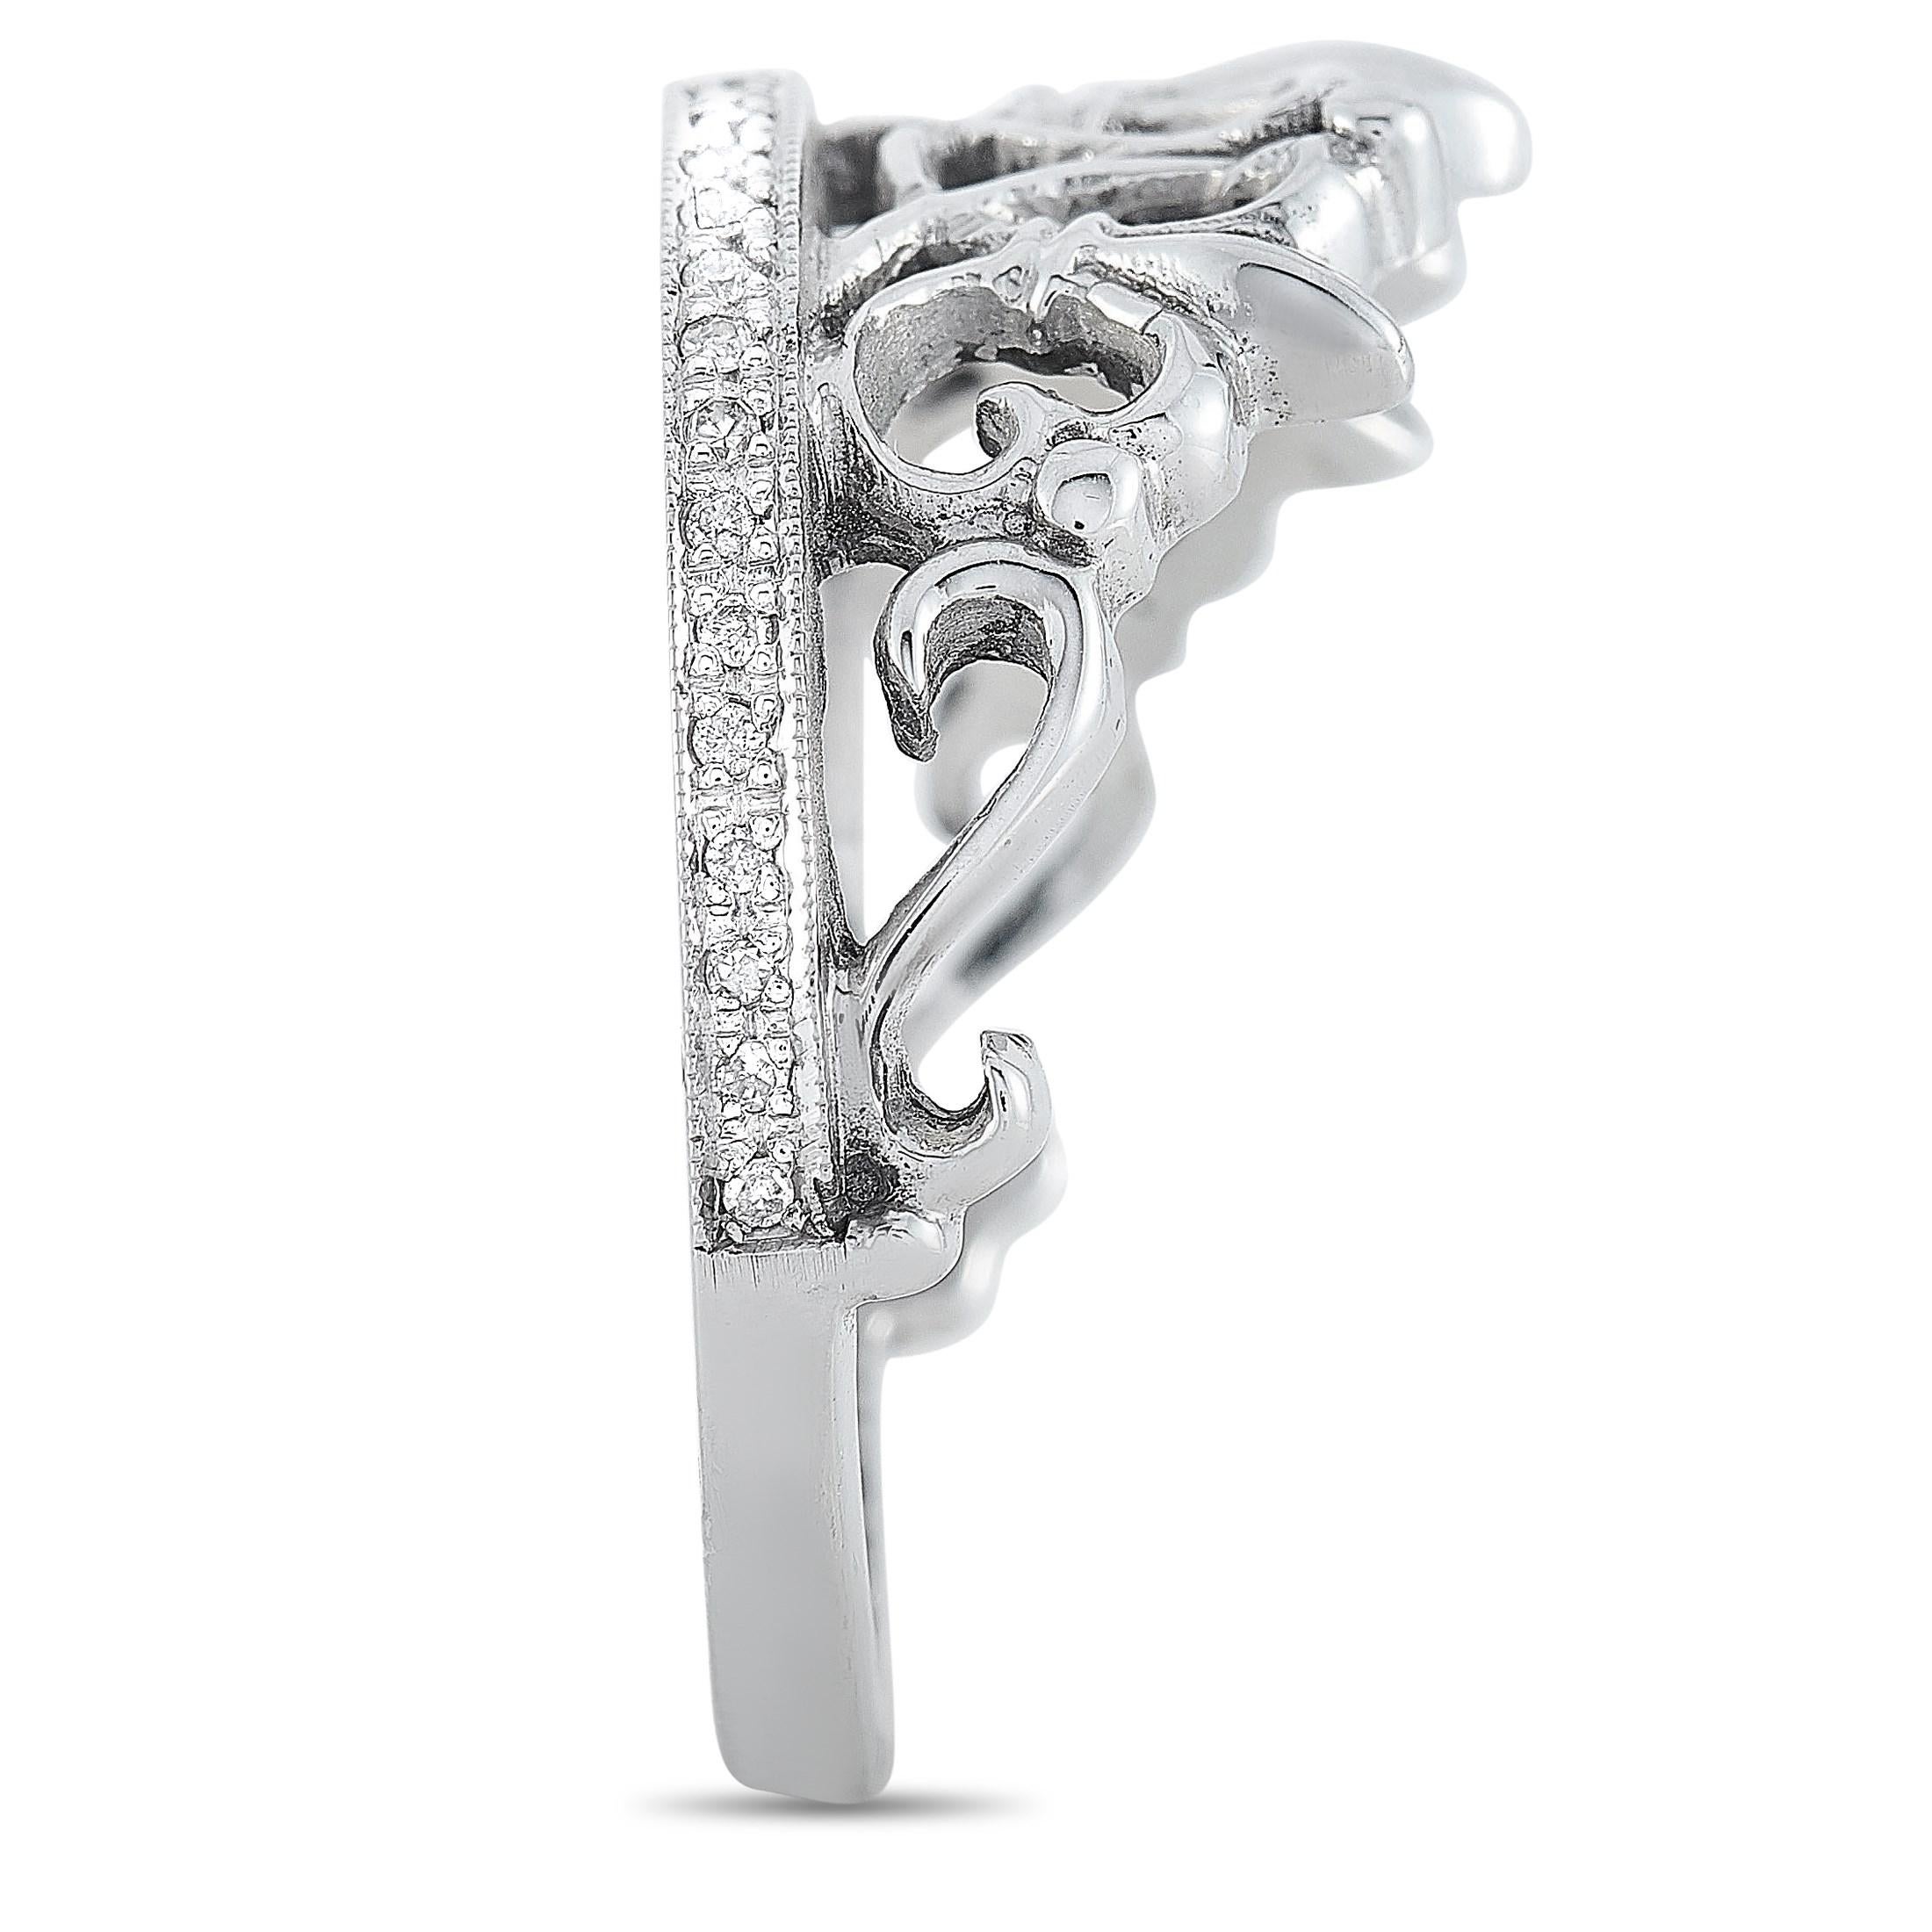 This King Baby Tiara ring is crafted from 14K white gold and embellished with gemstones. The ring weighs 7.3 grams and boasts a band thickness of 2 mm and a top height of 3 mm, while top dimensions measure 24 by 11 mm.

Offered in brand-new